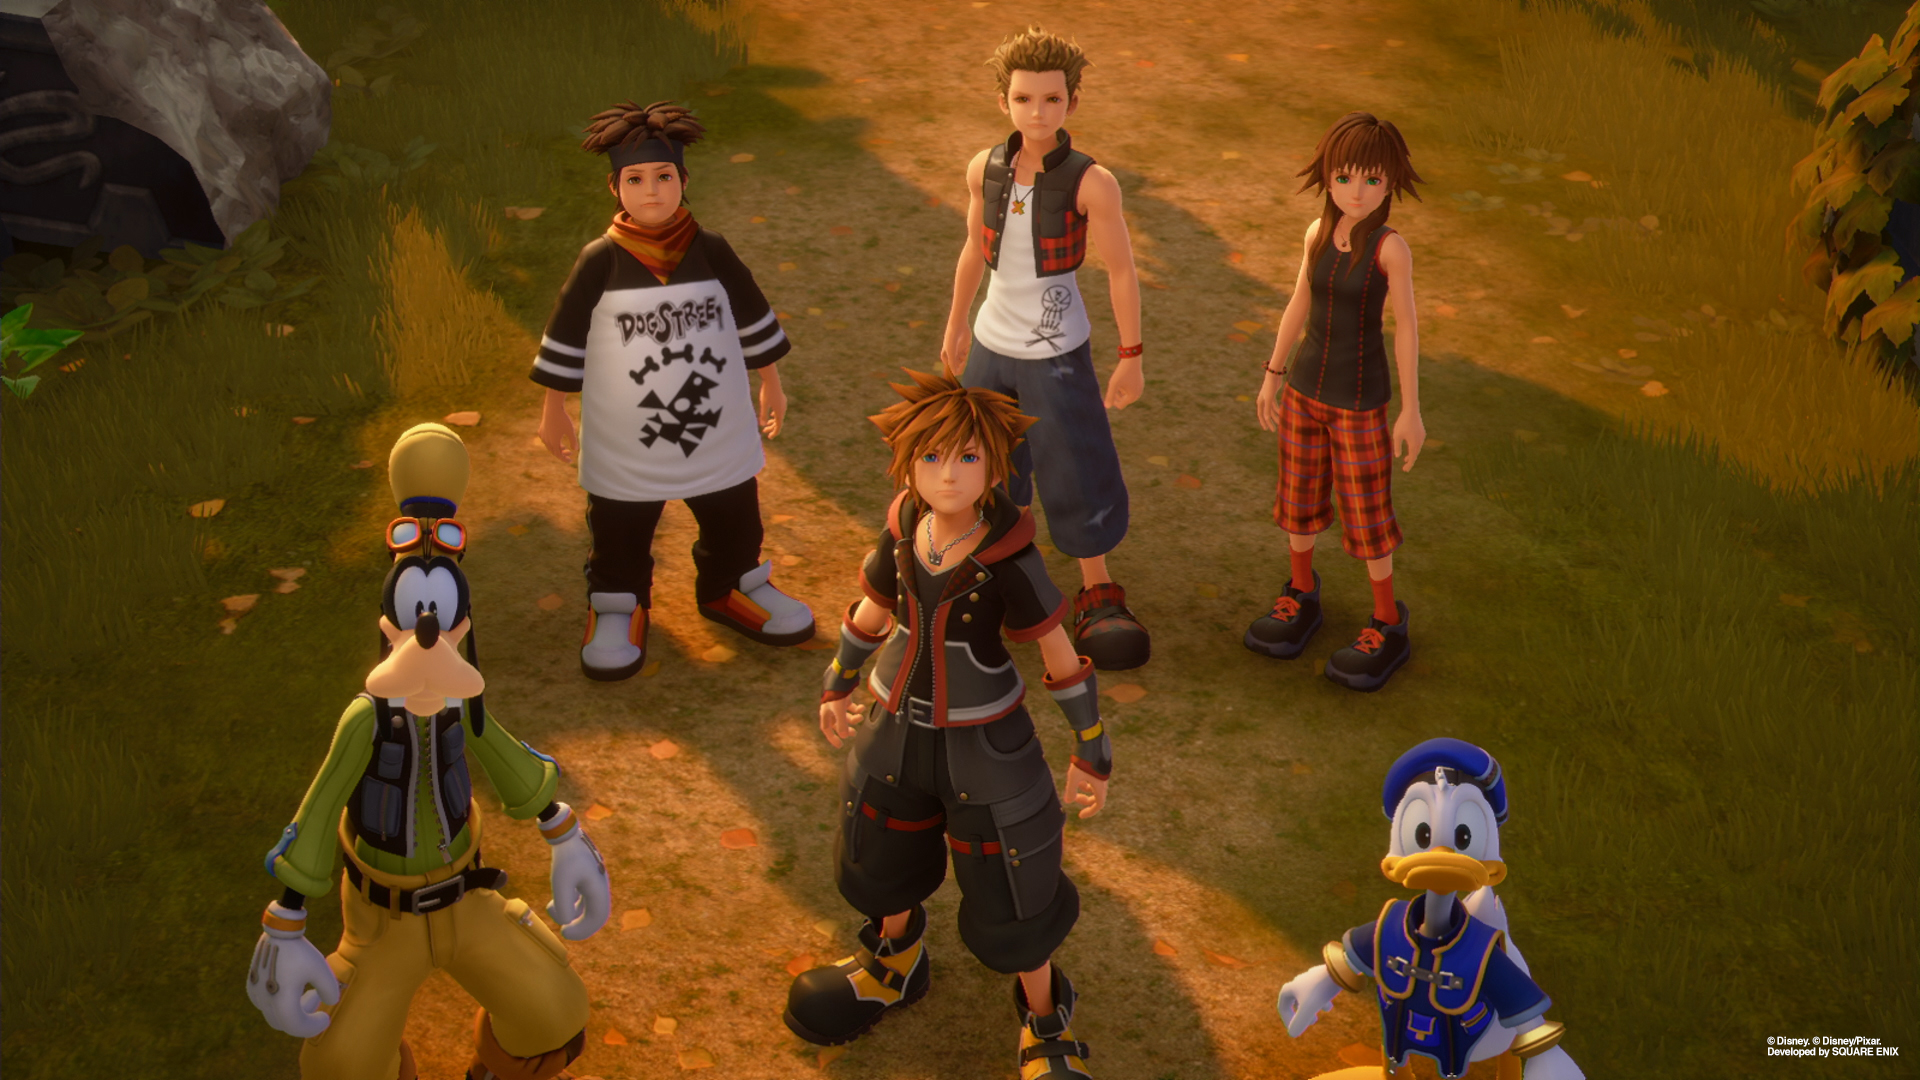 The entire Kingdom Hearts series is coming to Steam PC this June